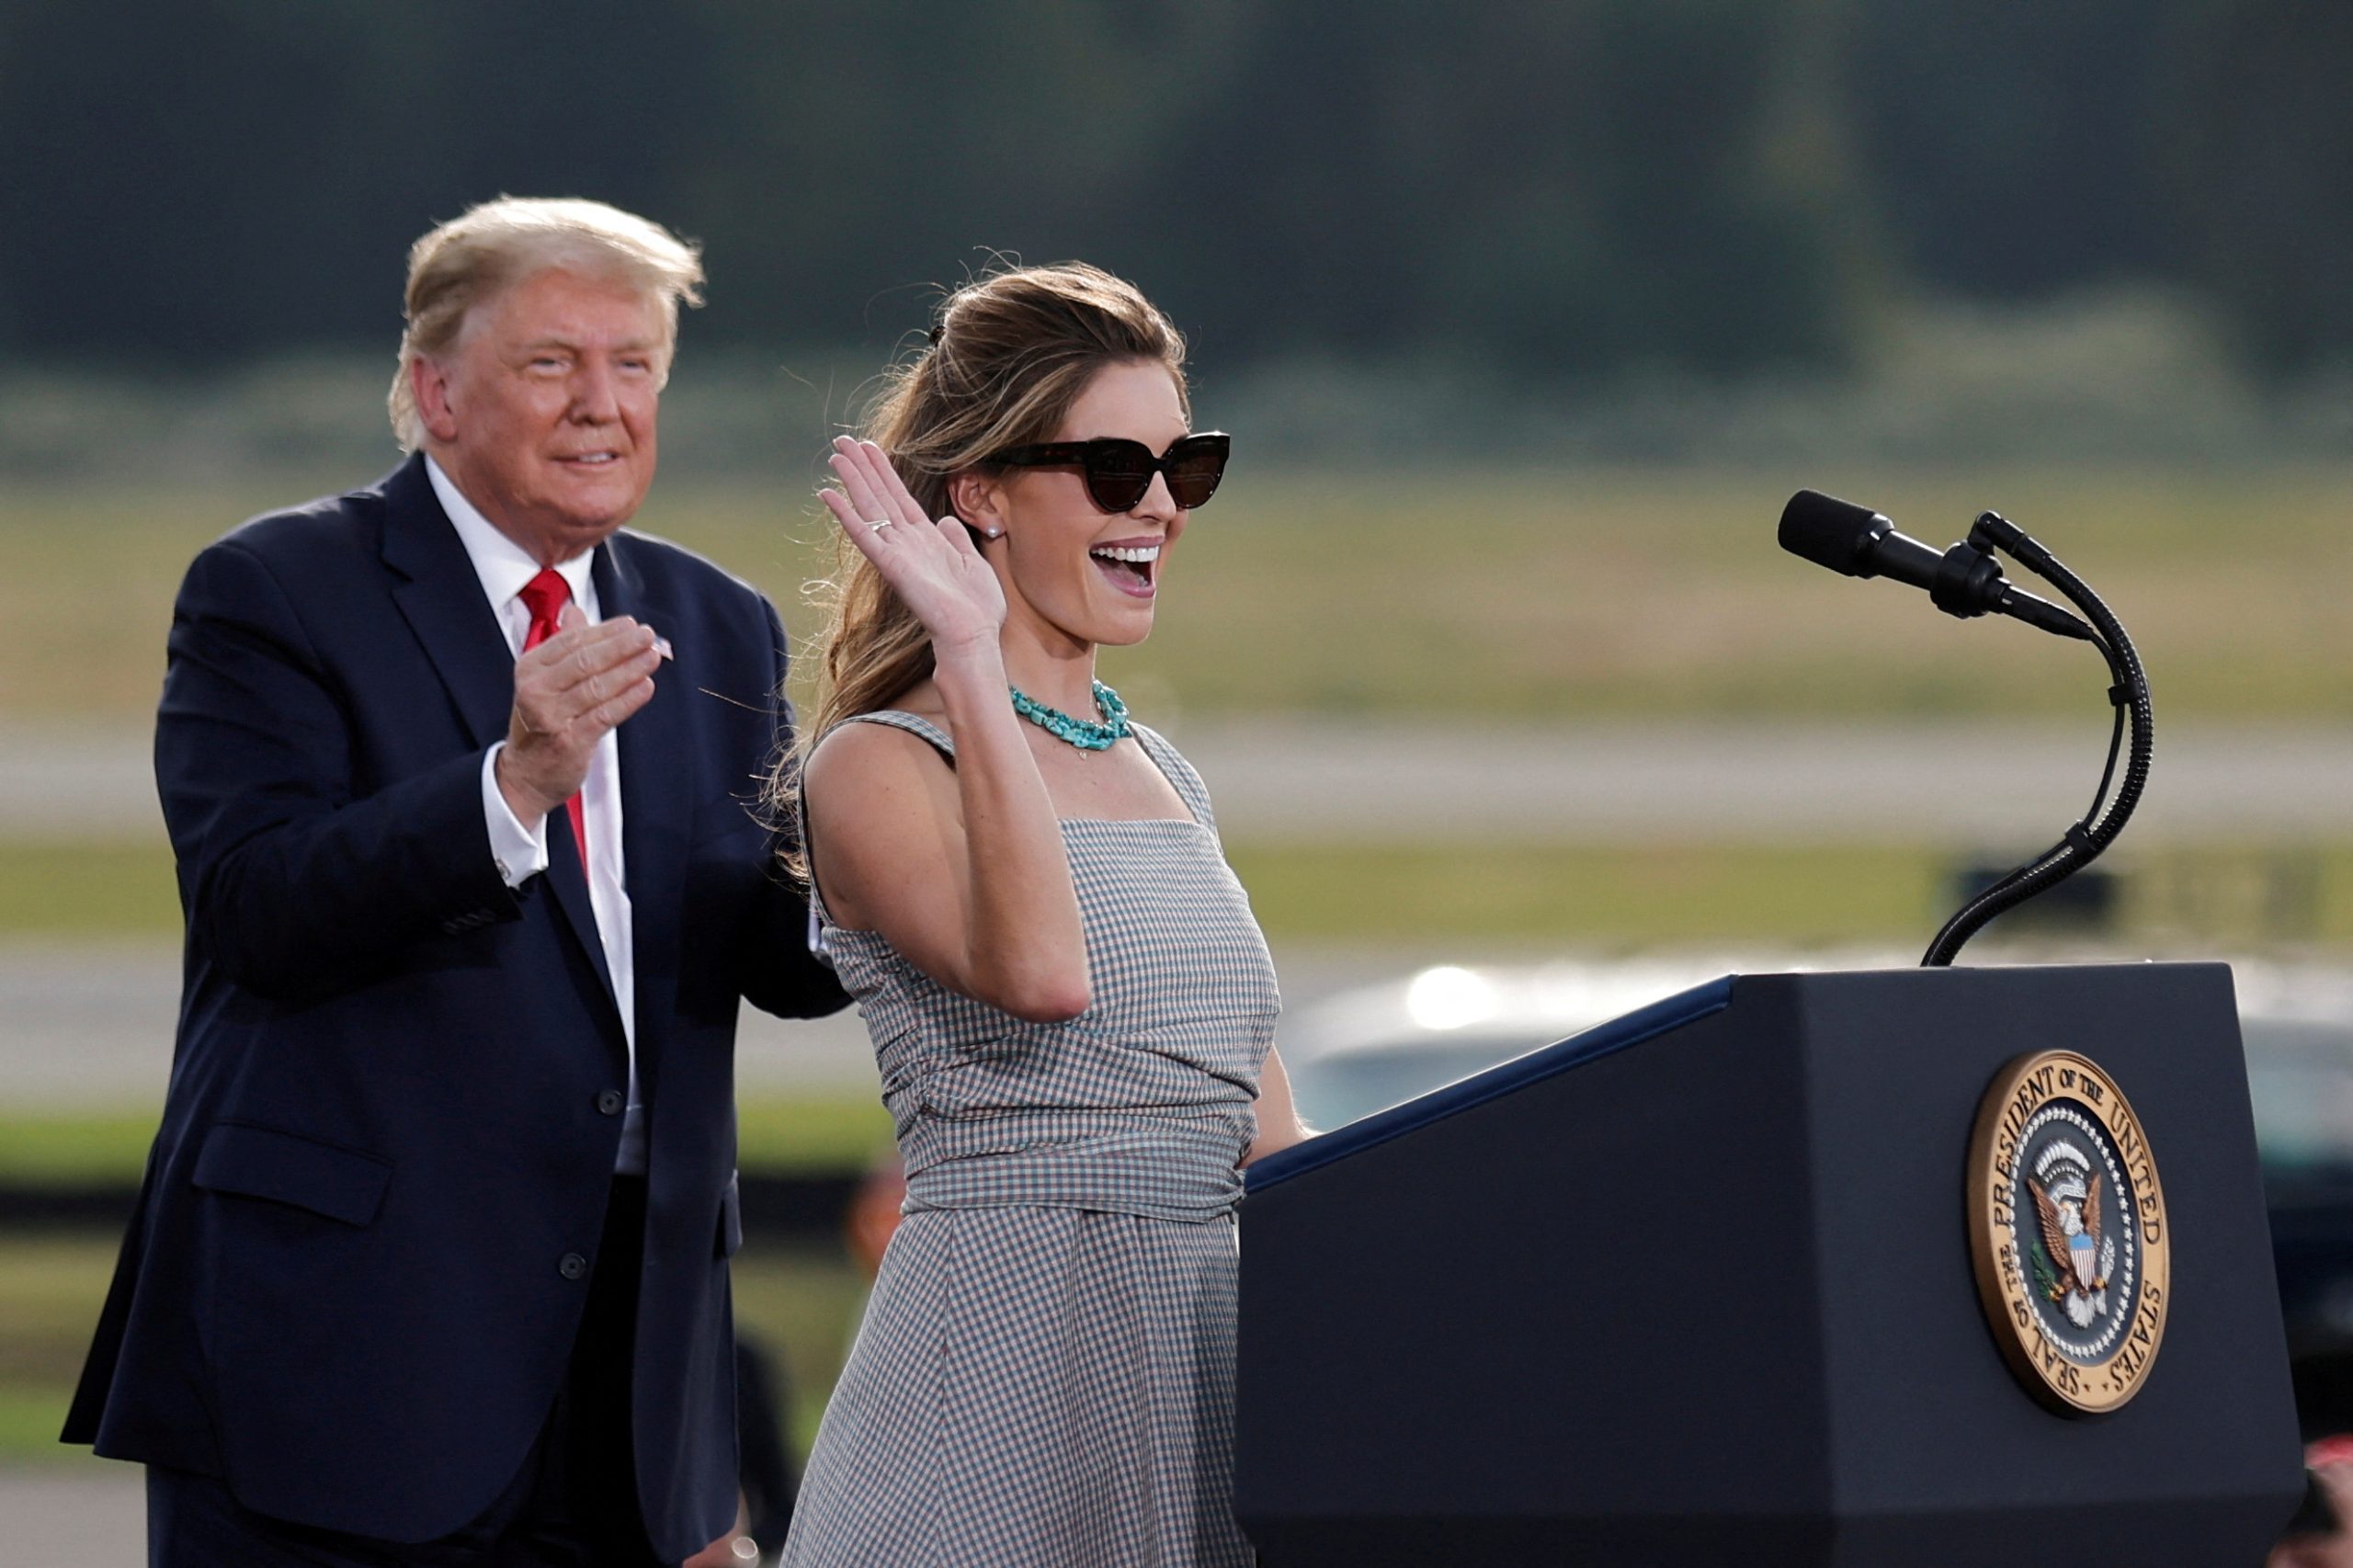 Trump with Hicks campaigning in 2020